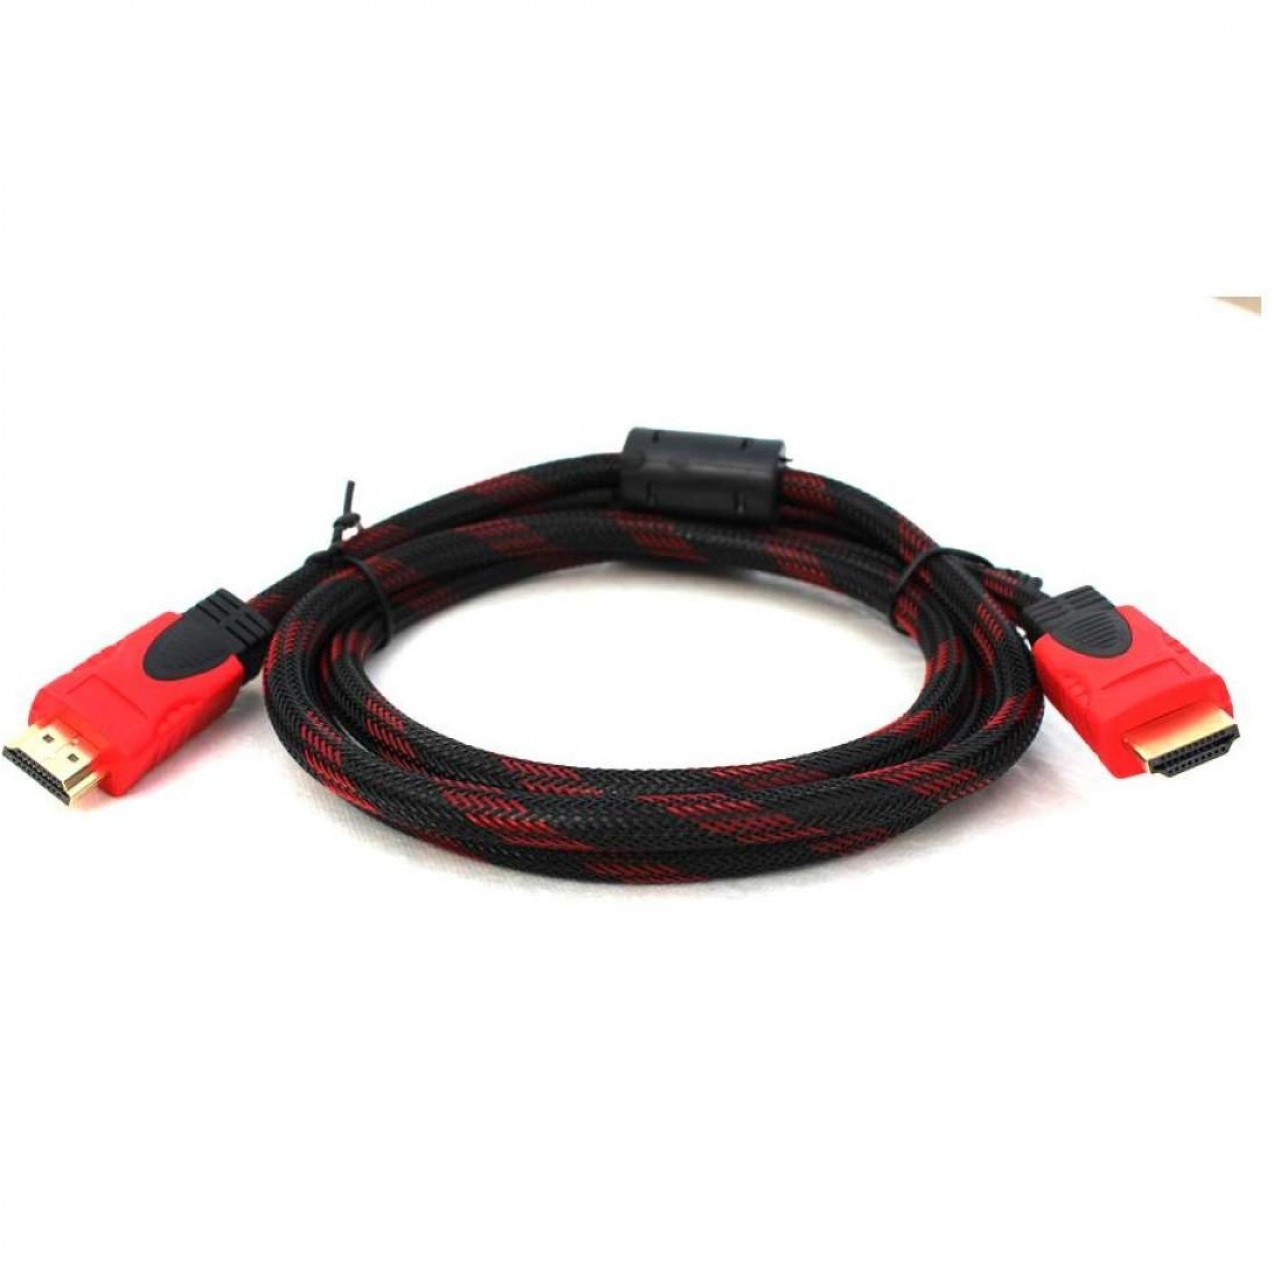 HDMI Round Cable Provides High Speed Content